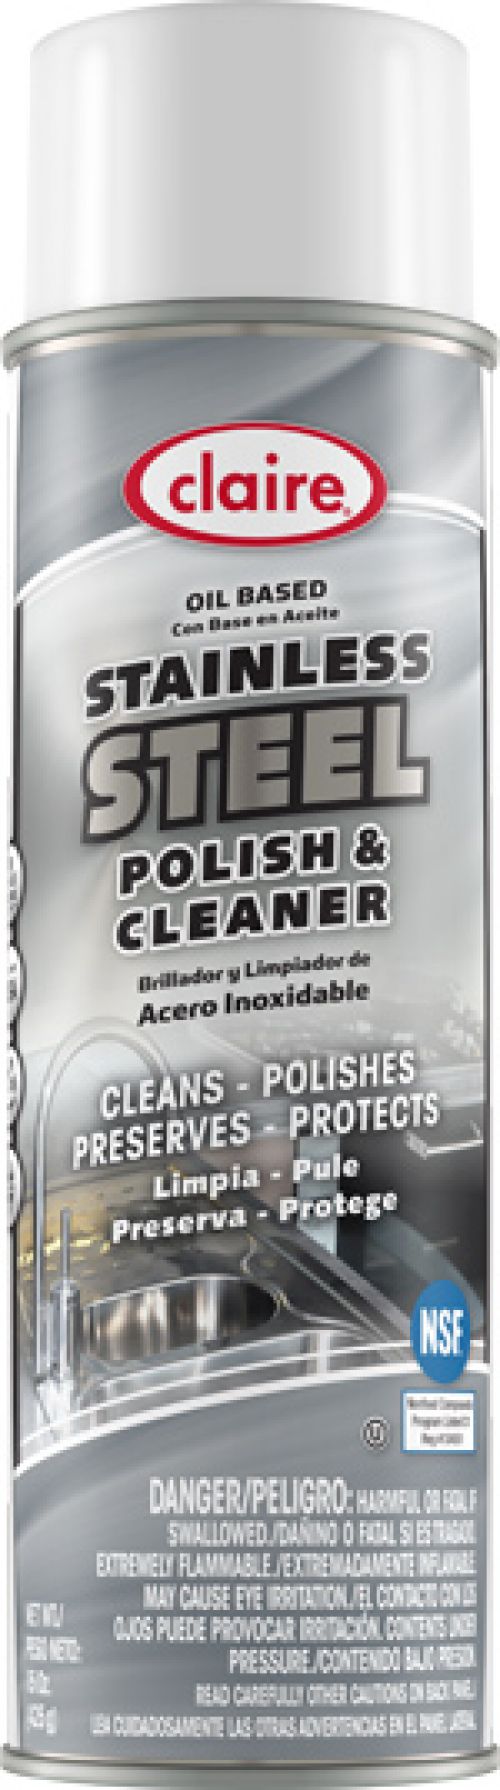 Claire Aerosol Stainless Steel Polish & Cleaner Oil Base Pack 12/20oz